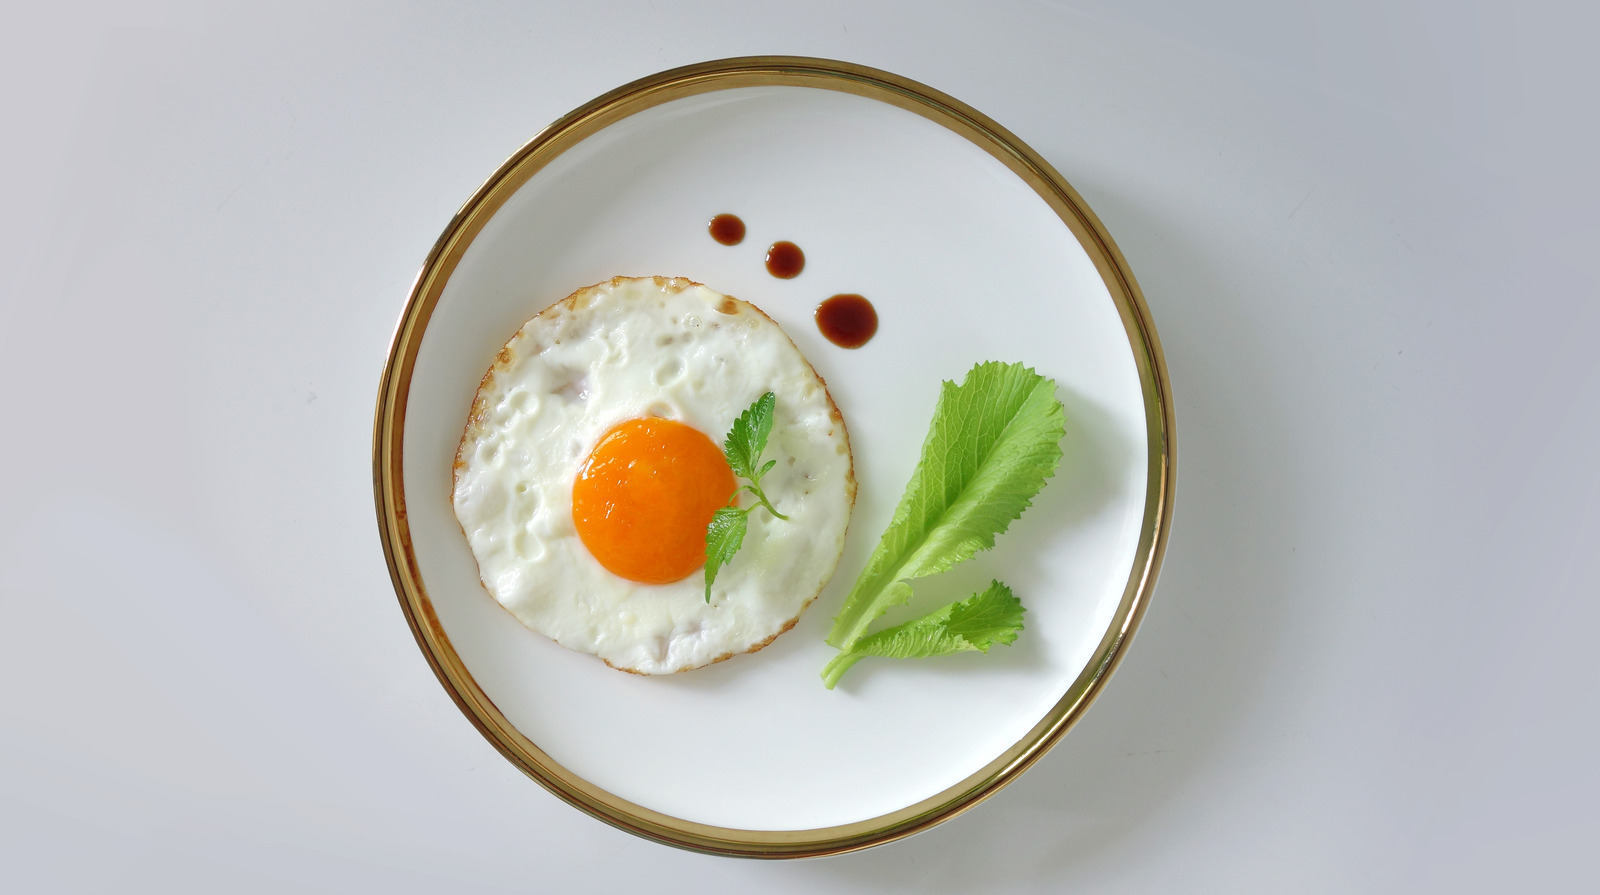 https://www.foodrepublic.com/img/gallery/upgrade-sunny-side-up-eggs-by-deglazing-your-pan/l-intro-1694204449.jpg